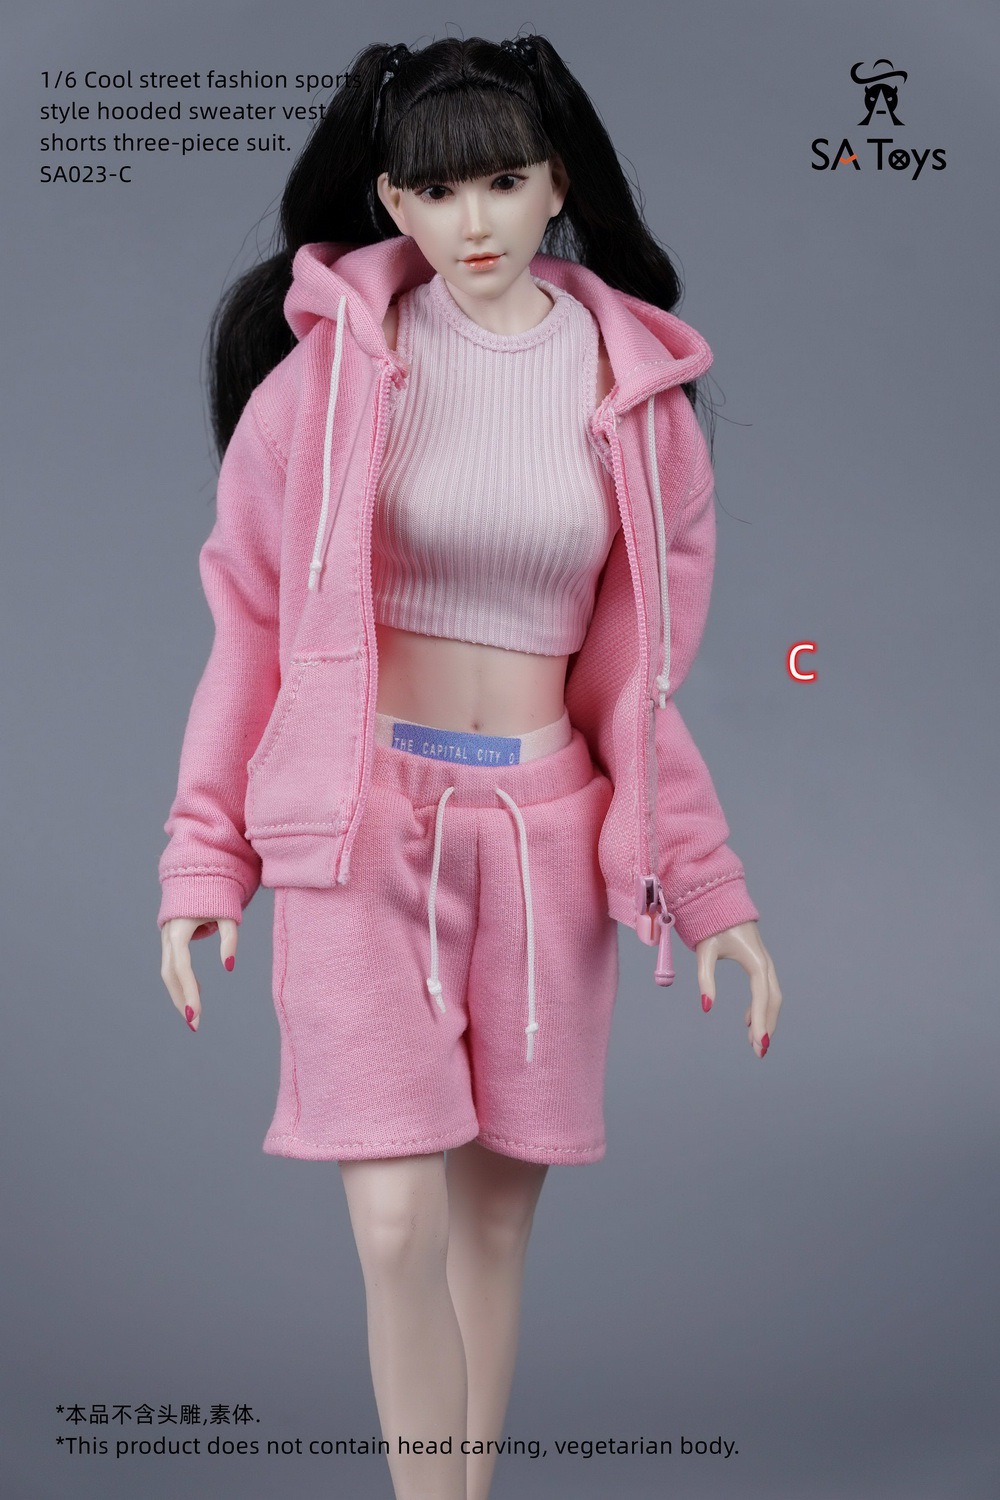 floralskirt - NEW PRODUCT: SA Toys: 1/6 hip skirt / floral elastic skirt / fashionable sports style hooded sweater cover, hip-hop fisherman hat halter and footwear casual pants [variety optional] 17021510